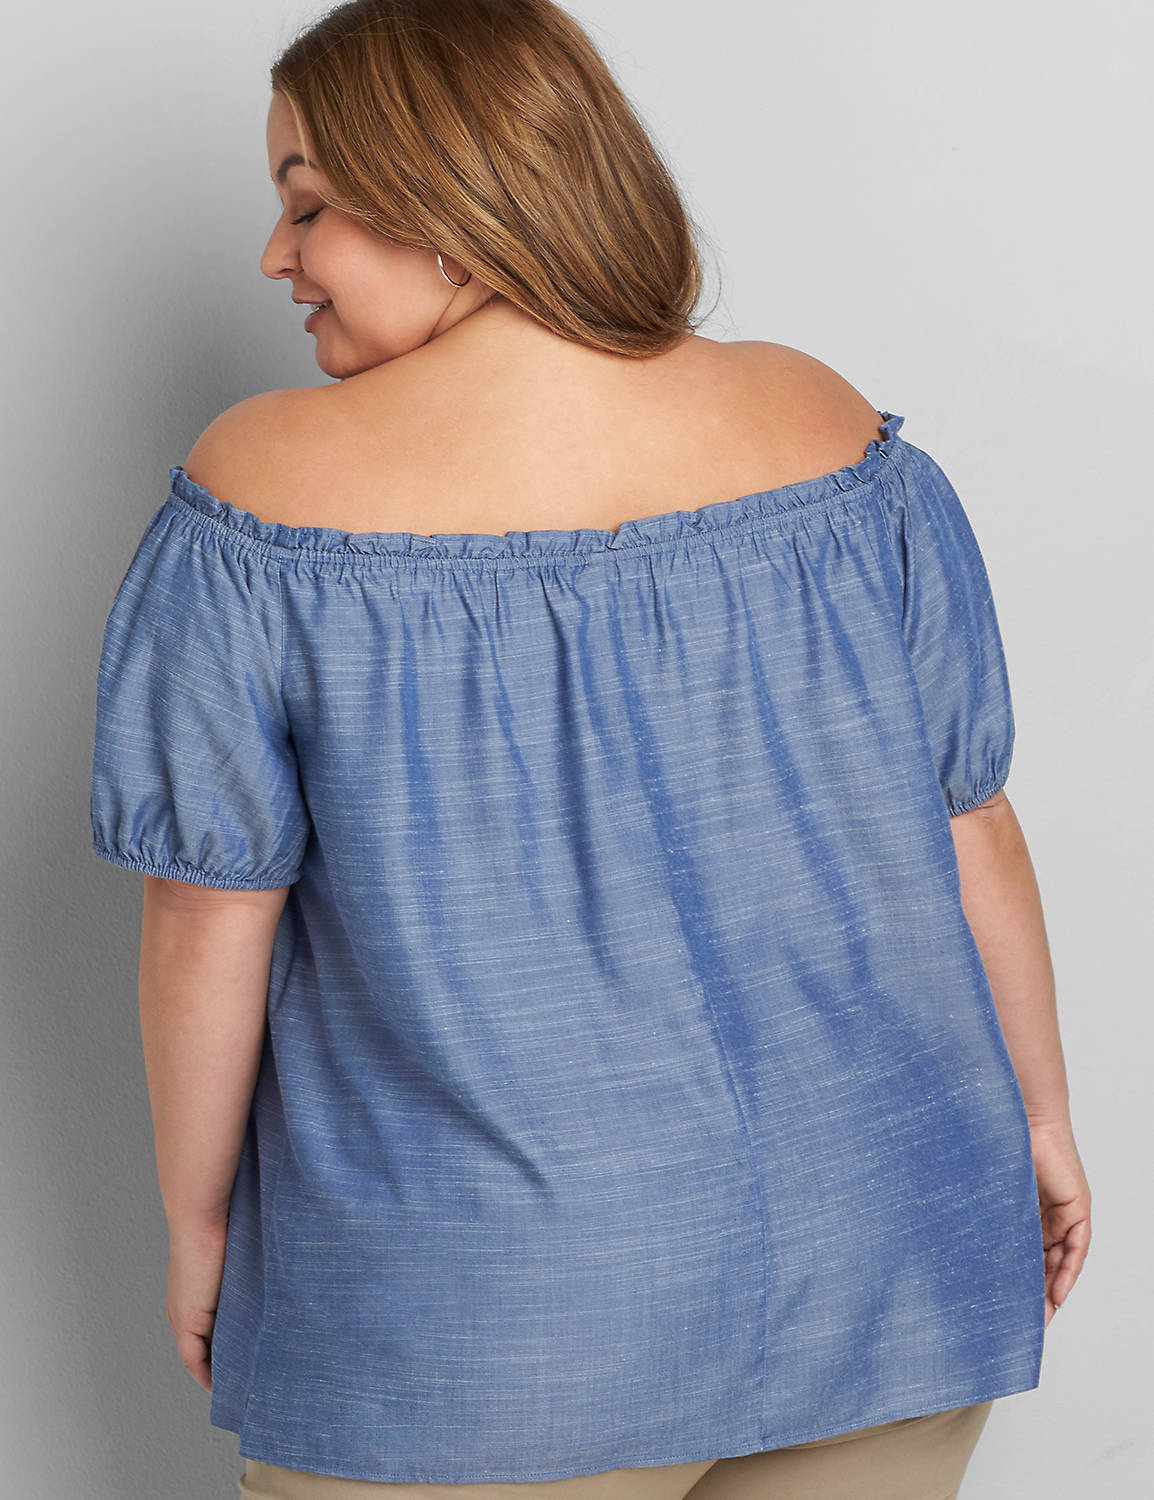 Short Puff Sleeve Off The Shoulder Chambray Top 1119589:Chambray:14/16 Product Image 2